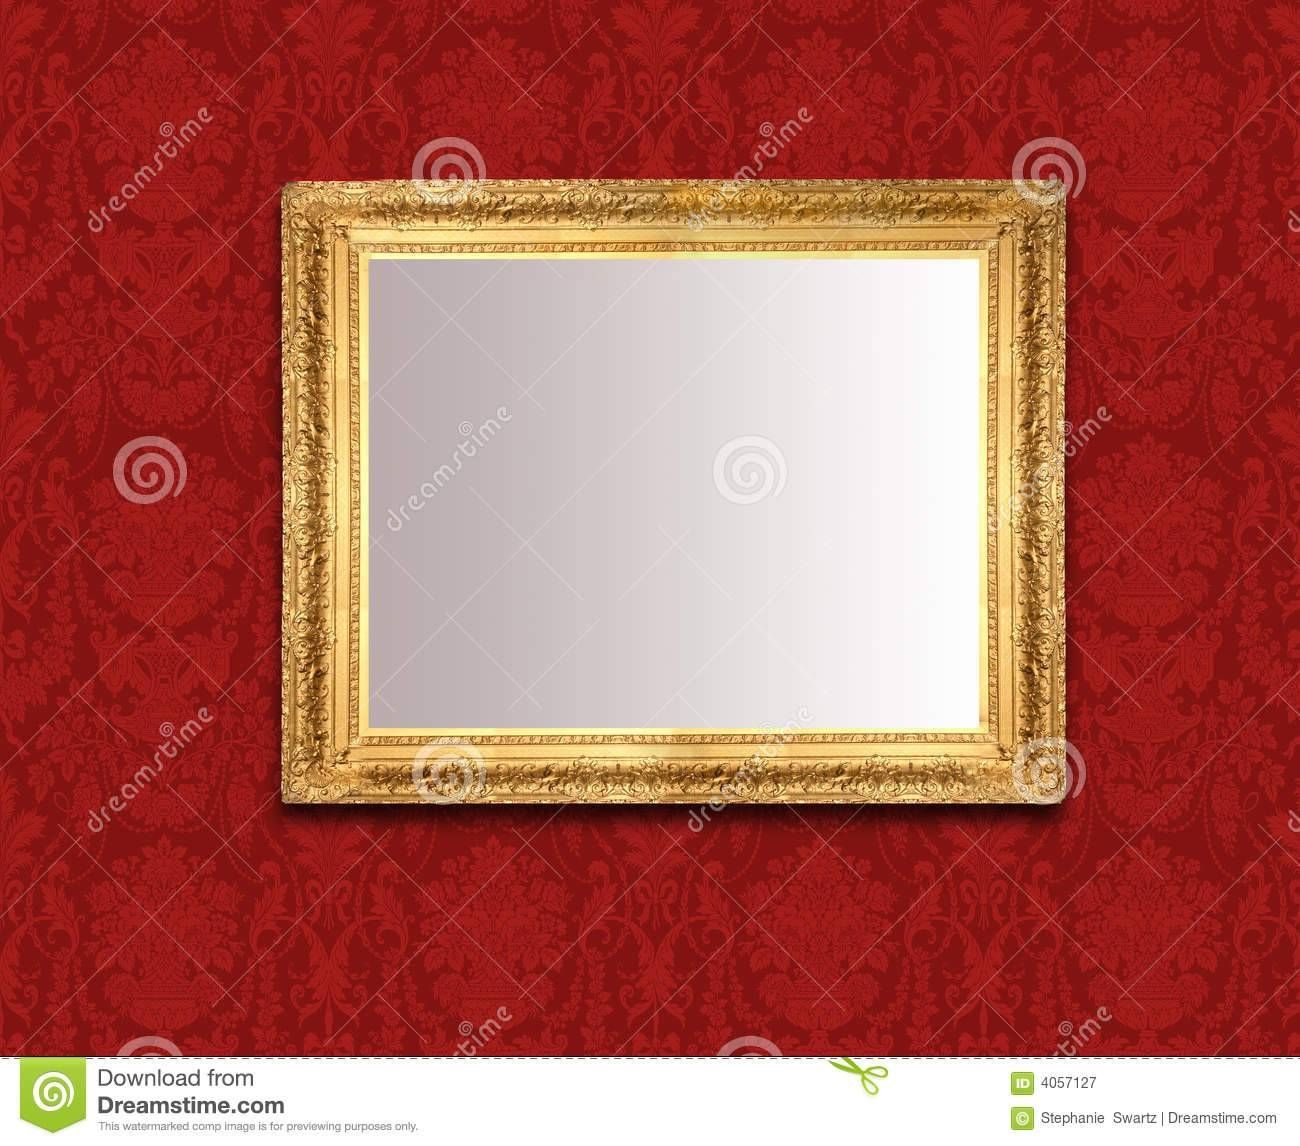 Wall Decor: Red Wall Mirror Design. Red Wall Mirror Uk (View 6 of 15)